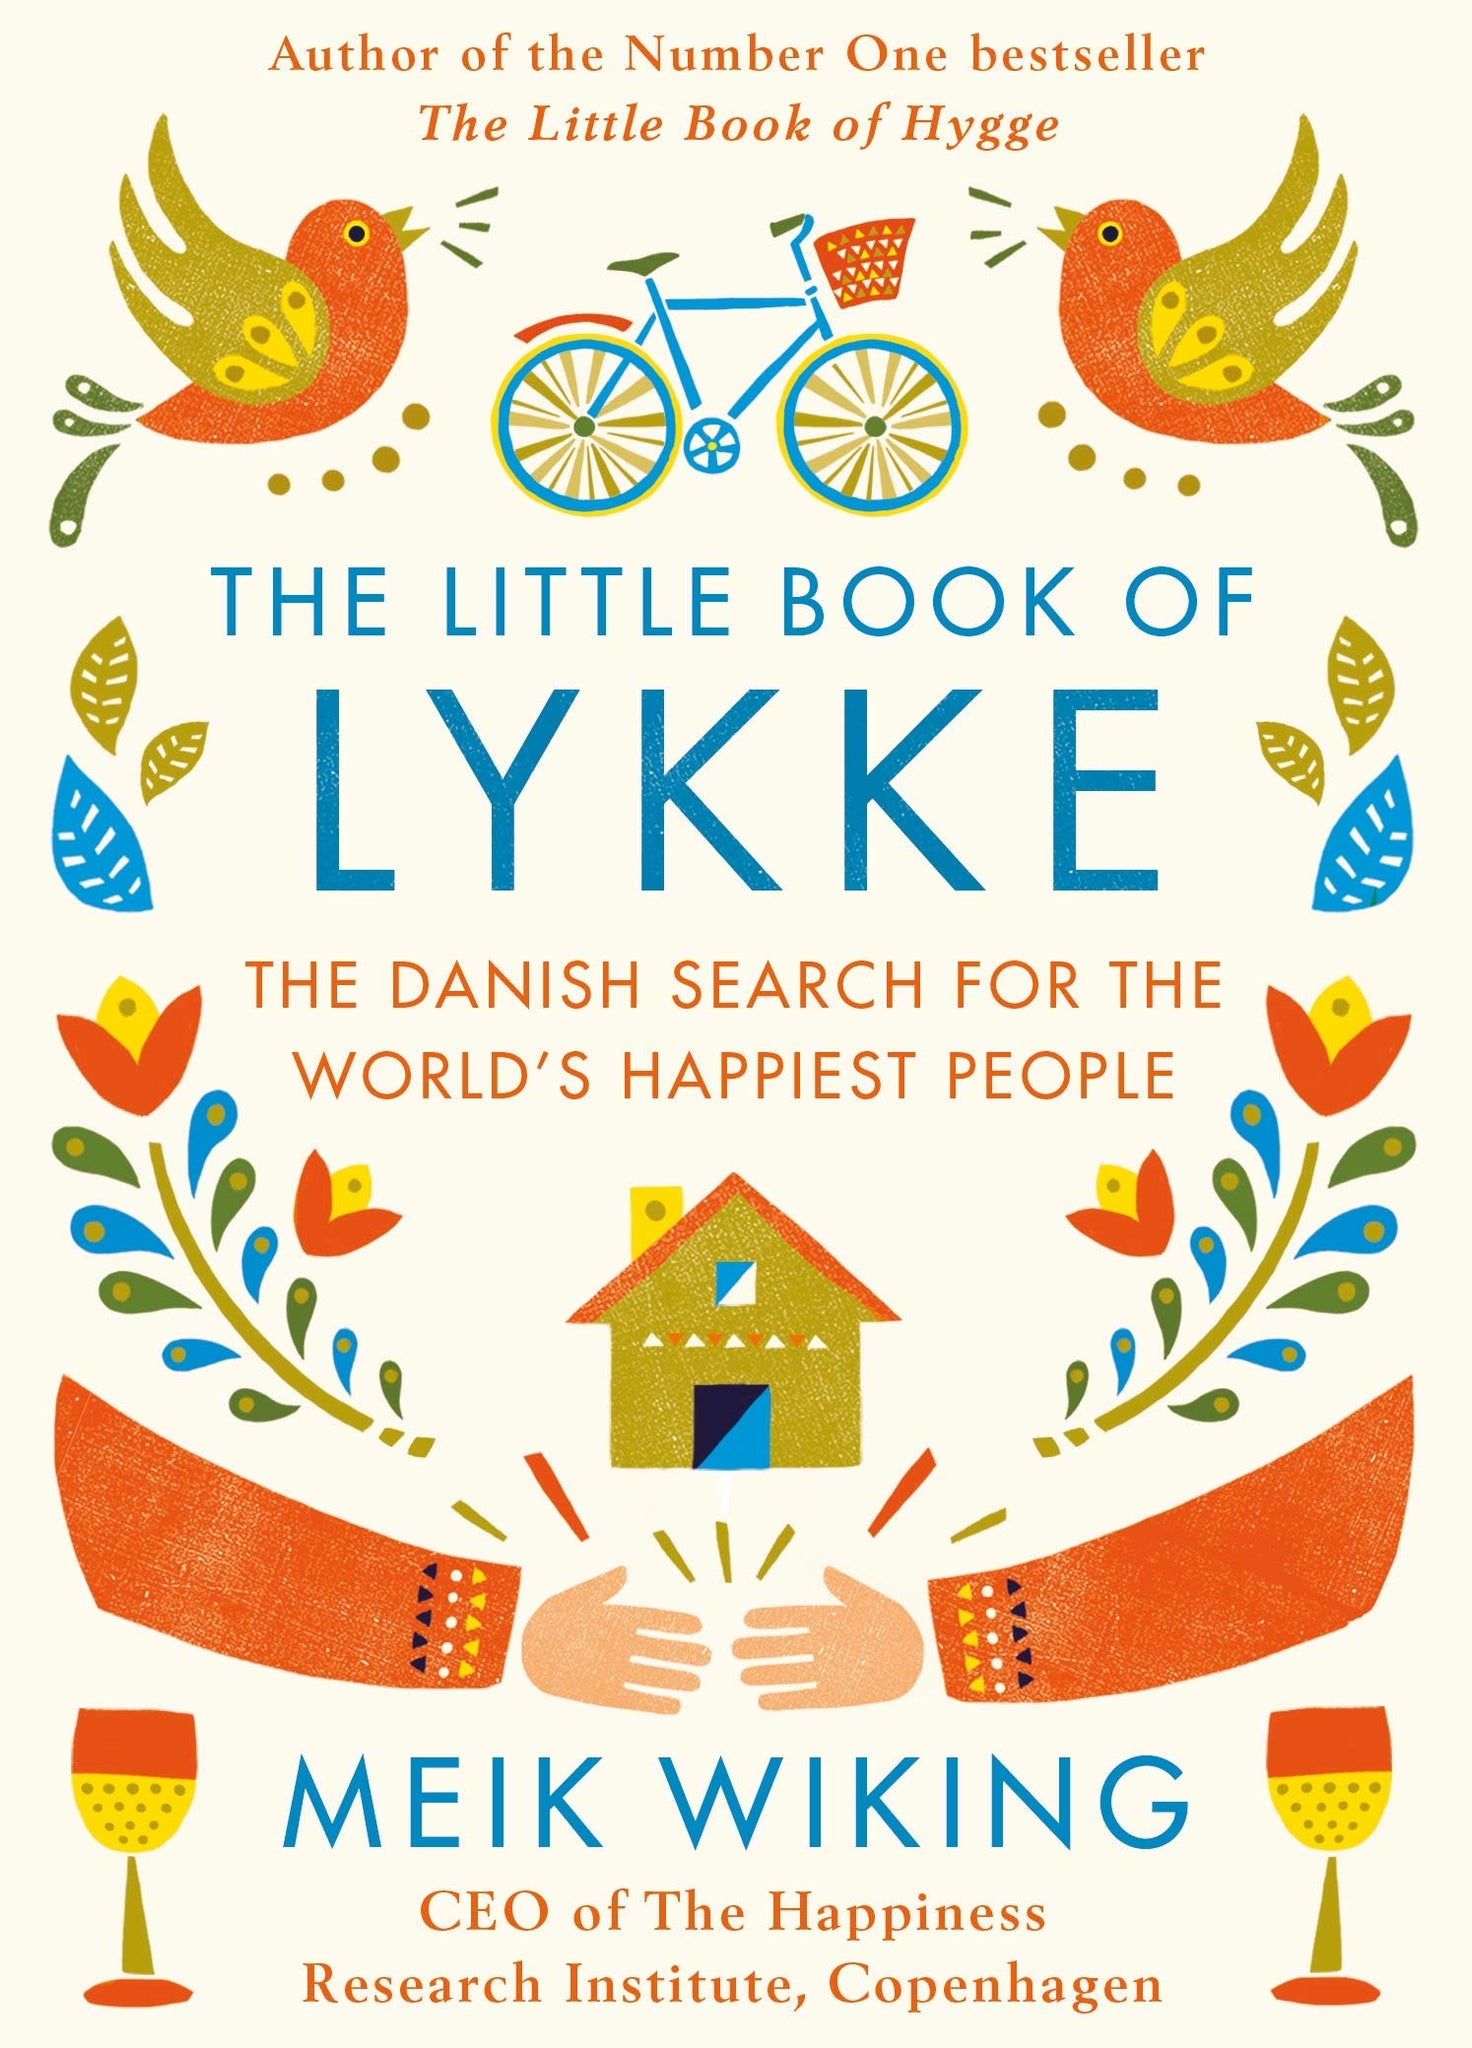 The Little Book of Lykke (Lead Title) -The Danish Search for the World's Happiest People